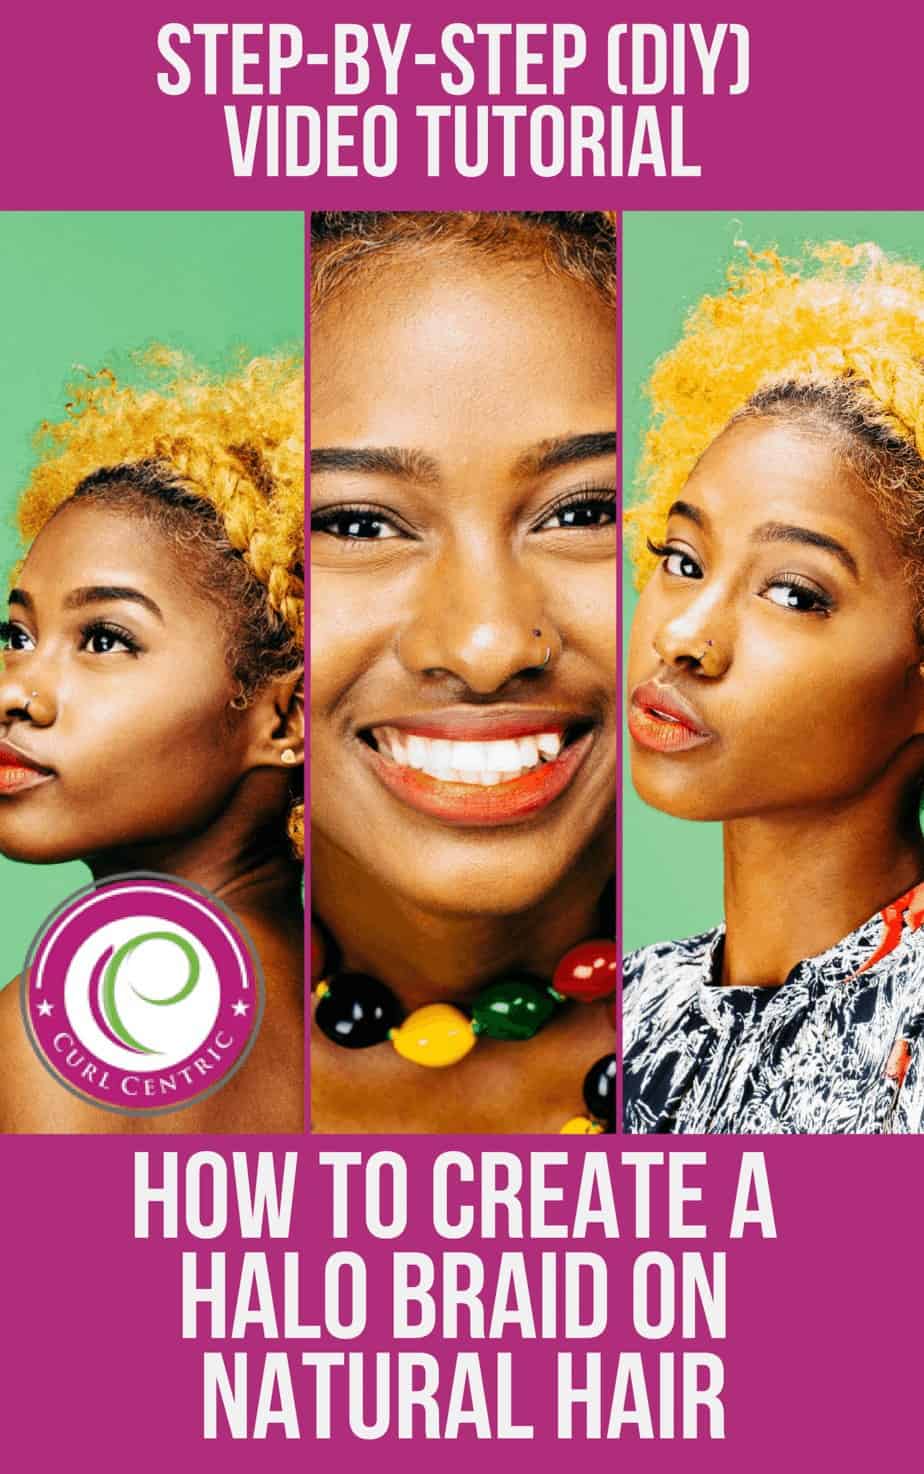 This article includes a step-by-step DIY halo braid video tutorial for black and white women, teens, girls or kids. The braid is similar the dutch braid or crown braid, but it can be completed with weave if you have short natural hair or on straight, wavy, curly and kinky hair types. Also, we